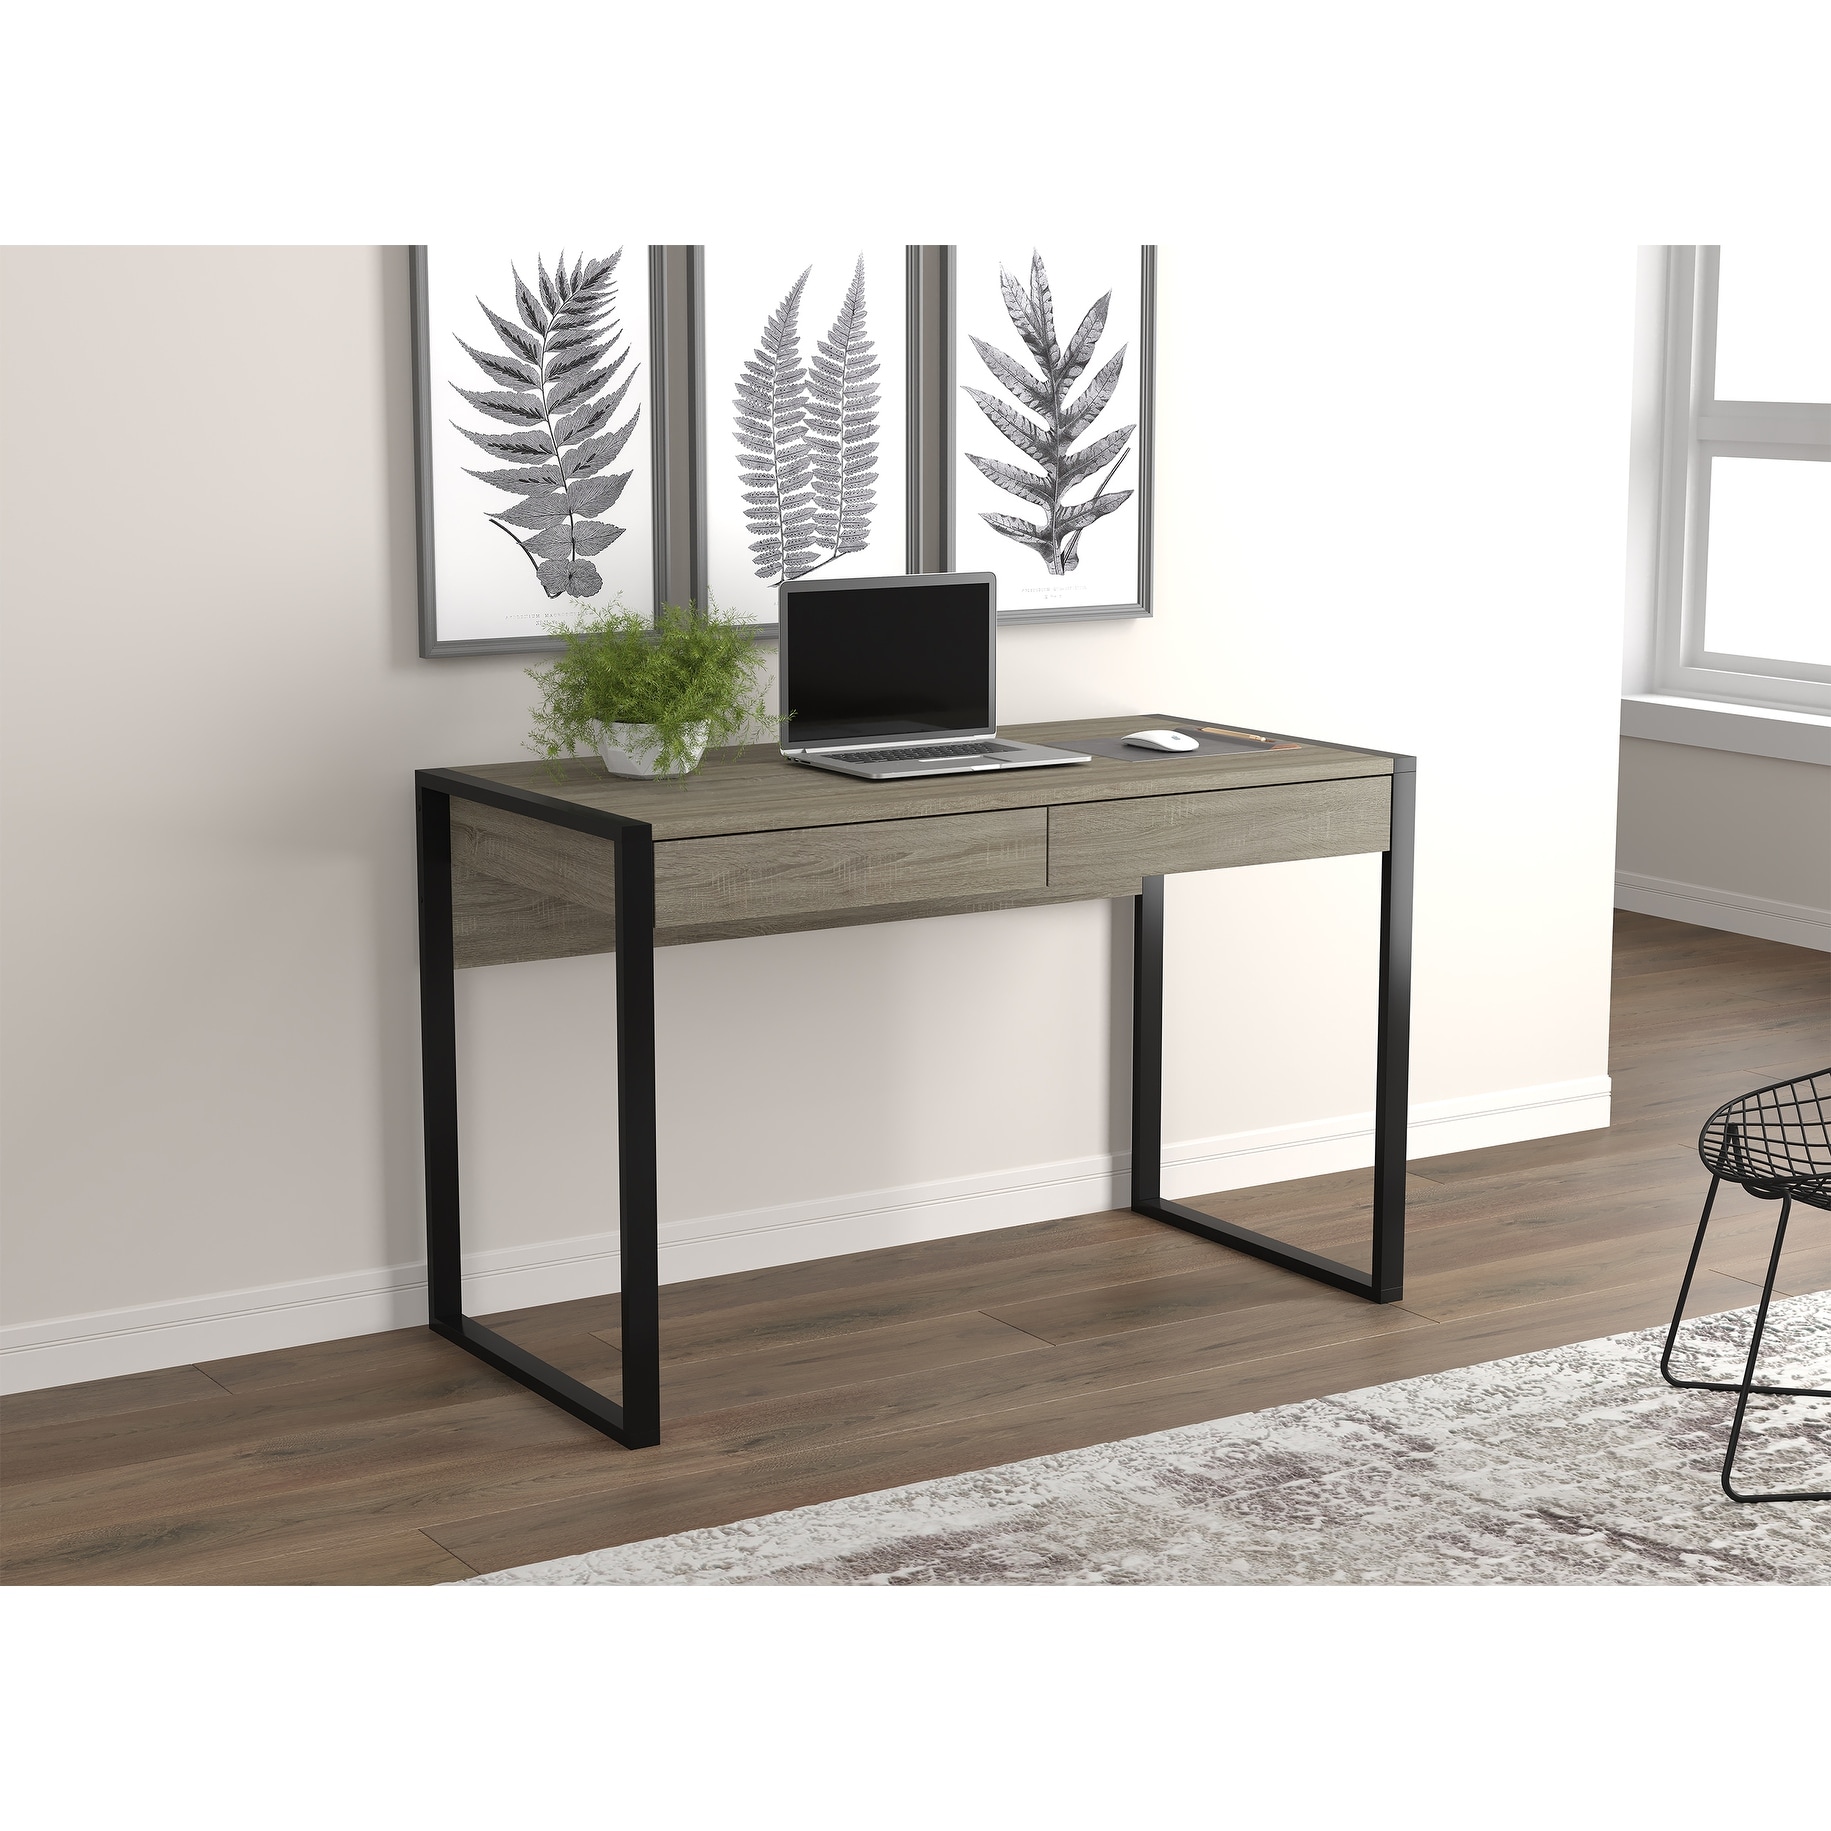 https://ak1.ostkcdn.com/images/products/is/images/direct/0d0d14db7d6eb6907c8892057e4acb6df12fe6f1/Computer-Desk-47L-Dark-Taupe-2-Drawers-Black-Metal.jpg